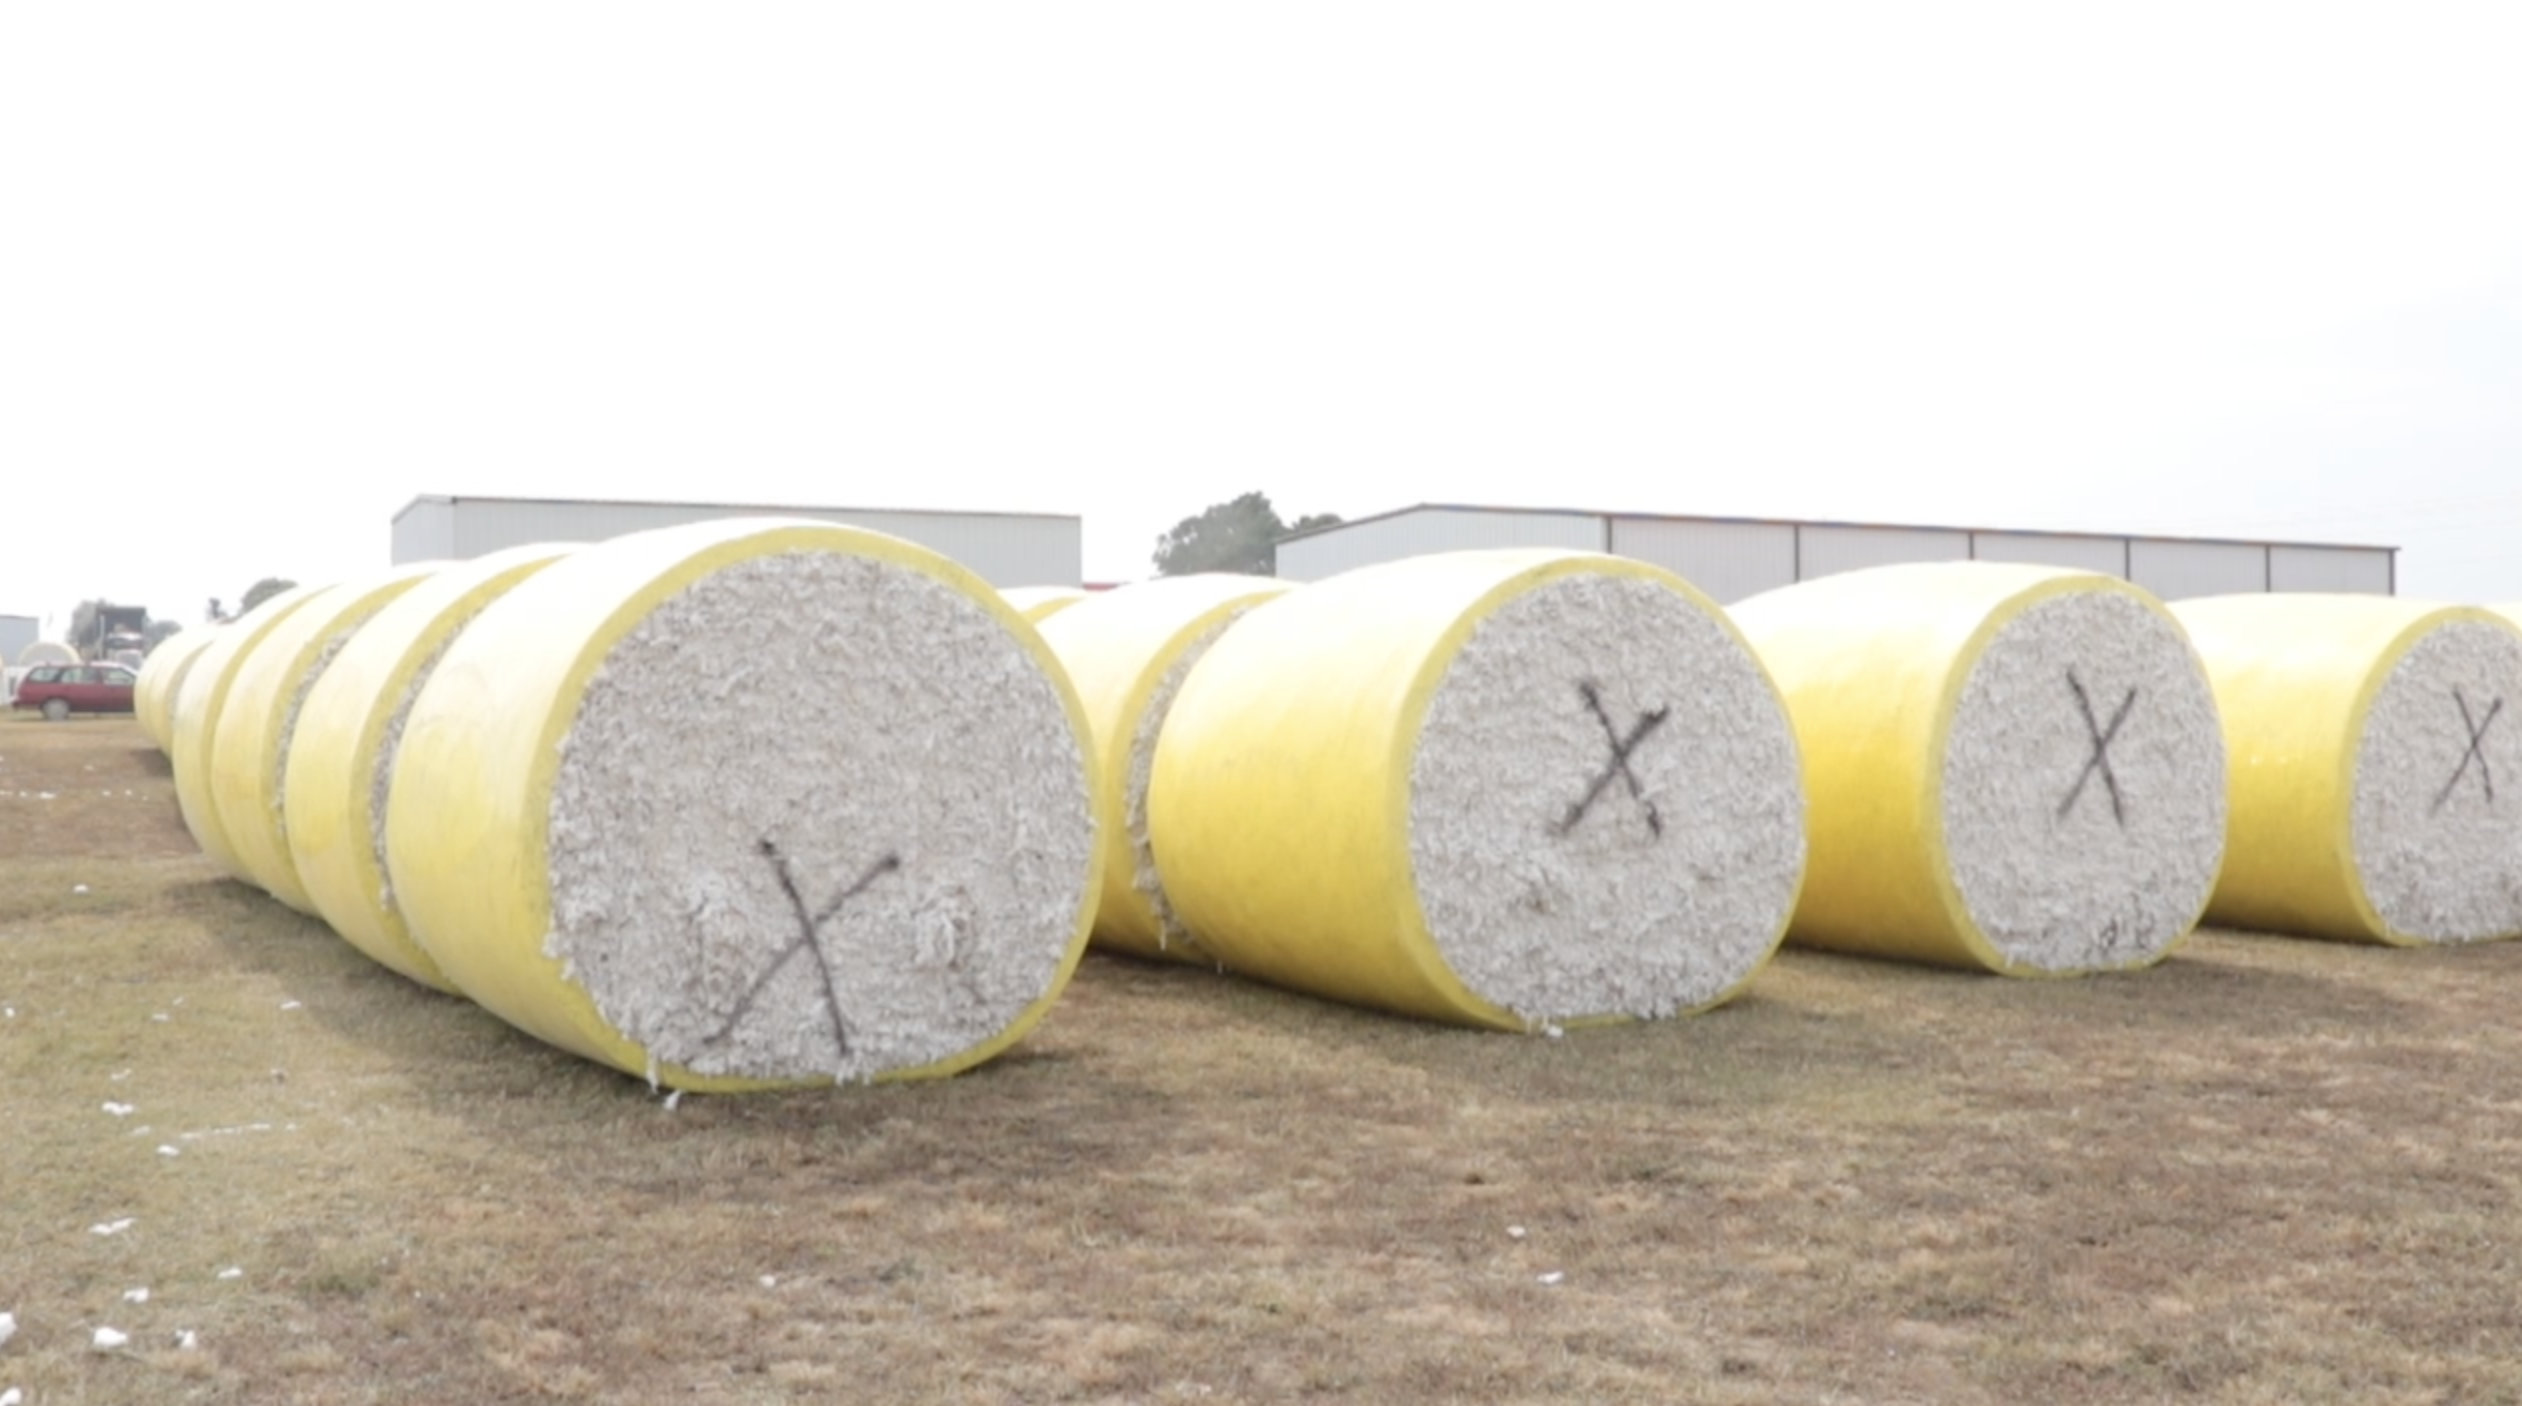 The bales will remain on the lot until ginning.